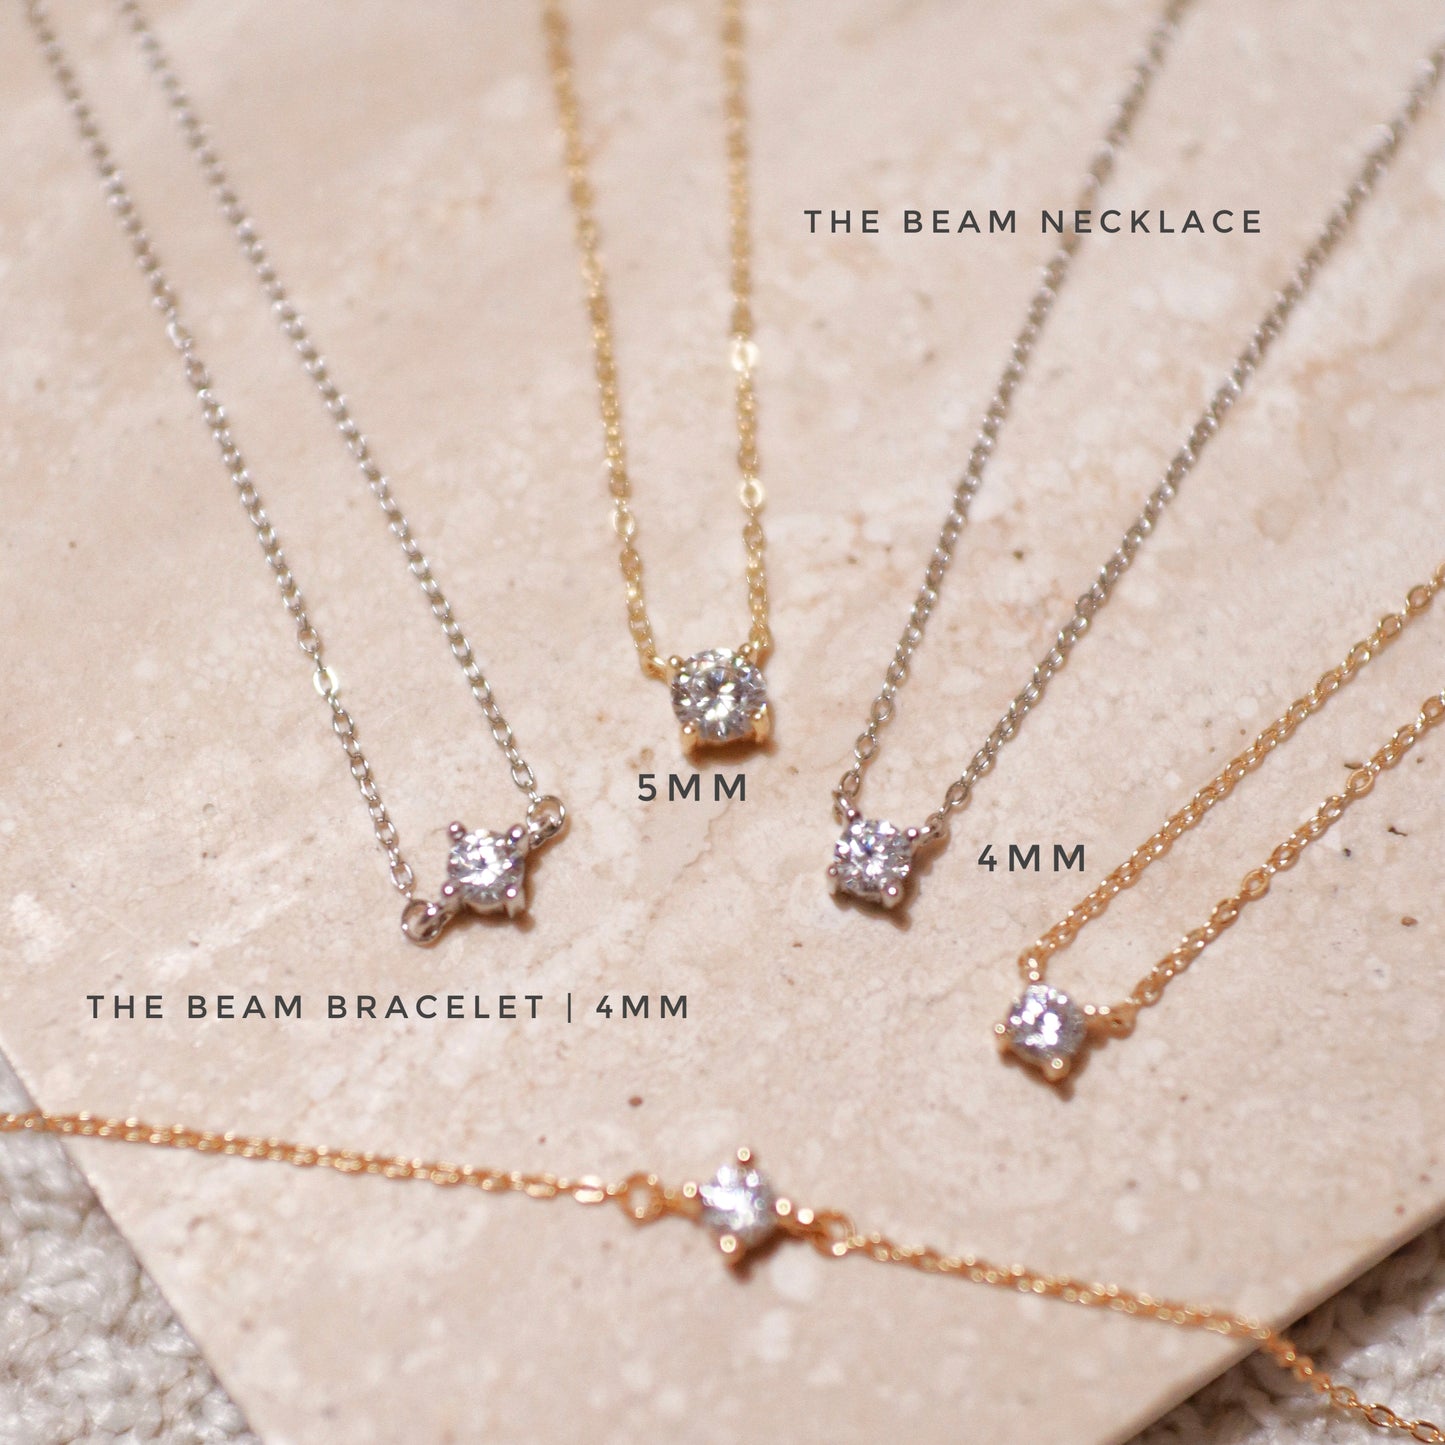 The Beam Necklace